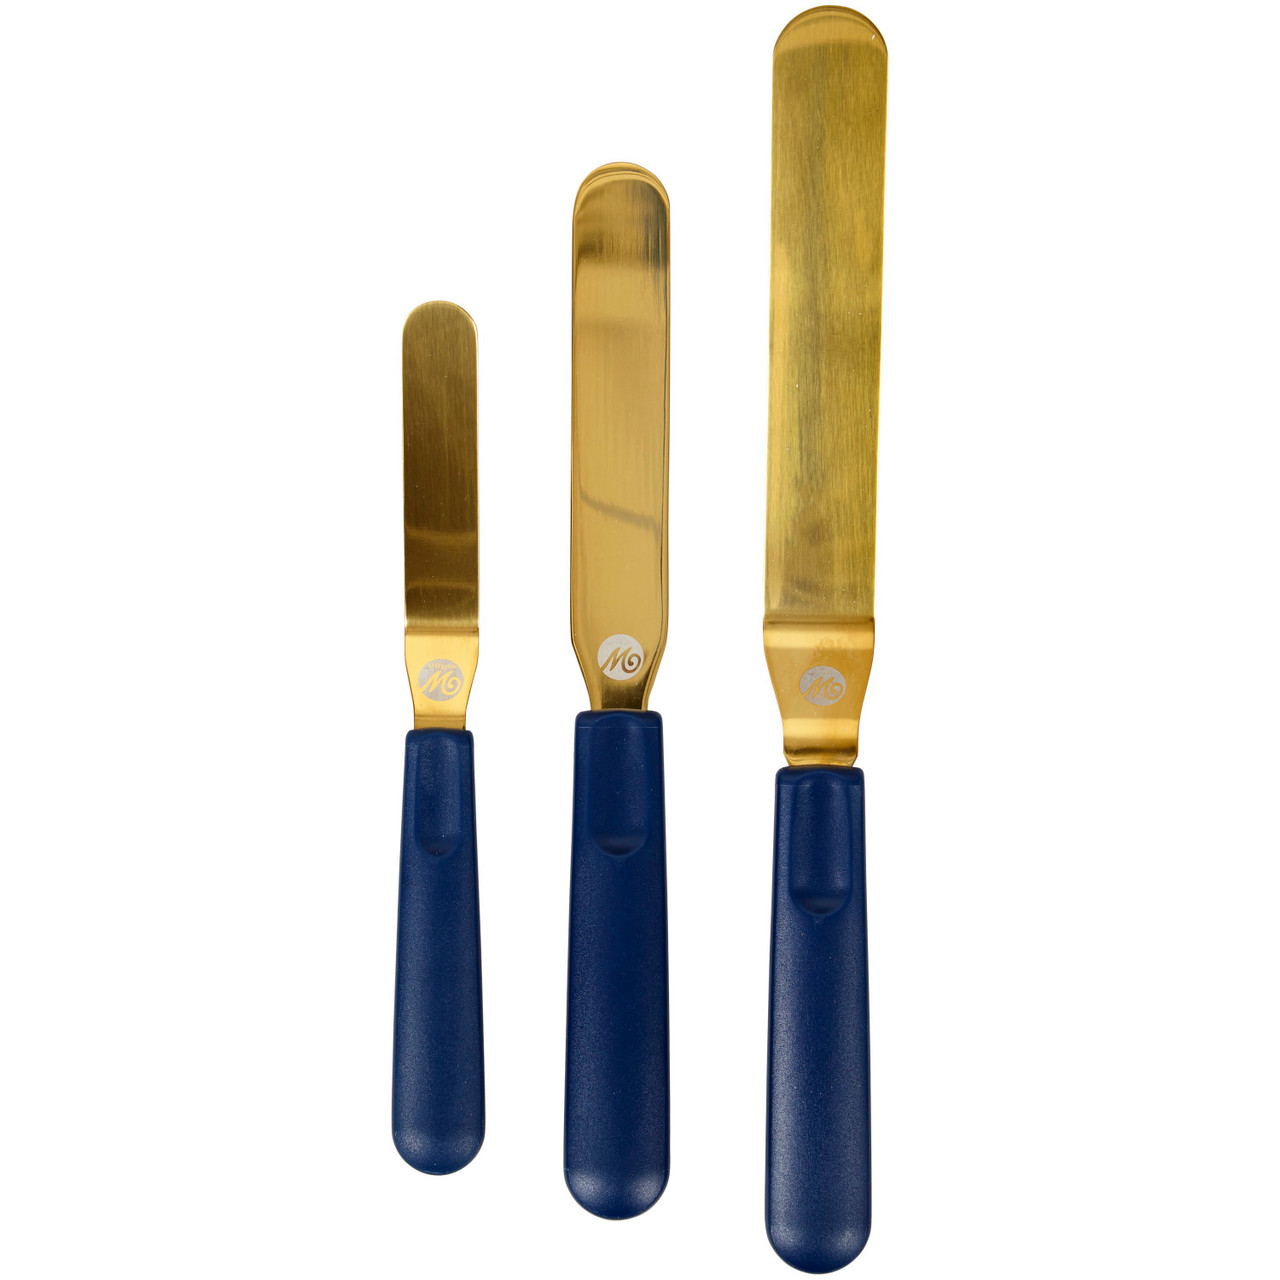 Navy Blue and Gold Icing Spatula Set, 3-Piece - Wilton